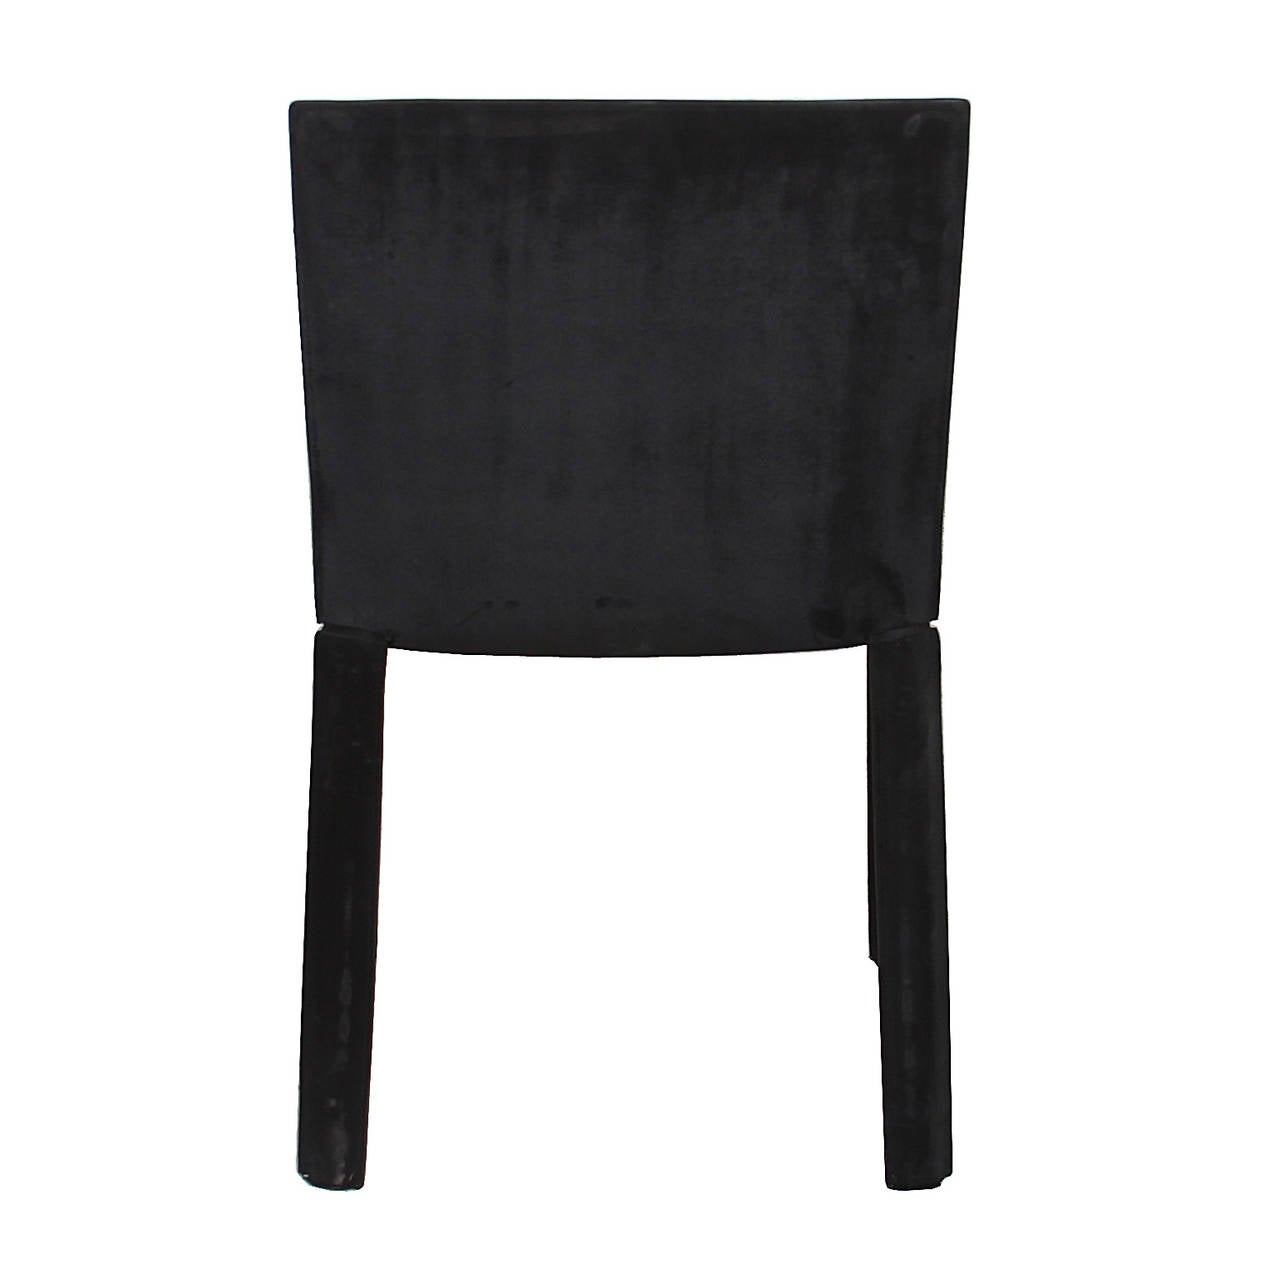 Modern De Couro of Brazil Chairs in Black Leather For Sale 1